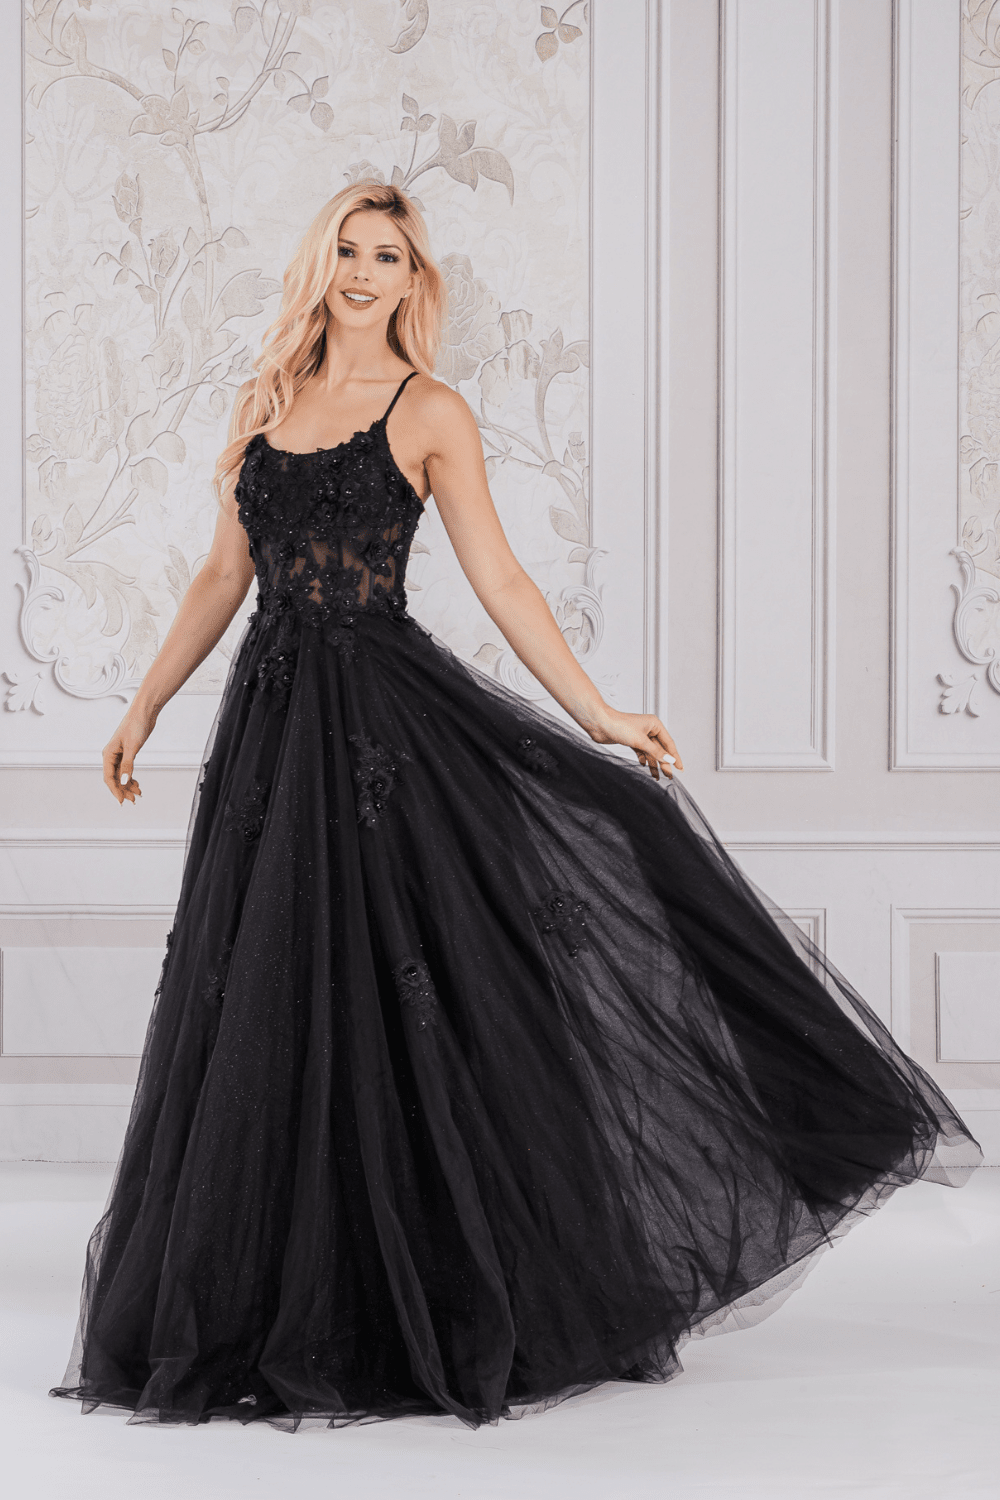 Lace Applique Sleeveless Gown by Amelia Couture 7035